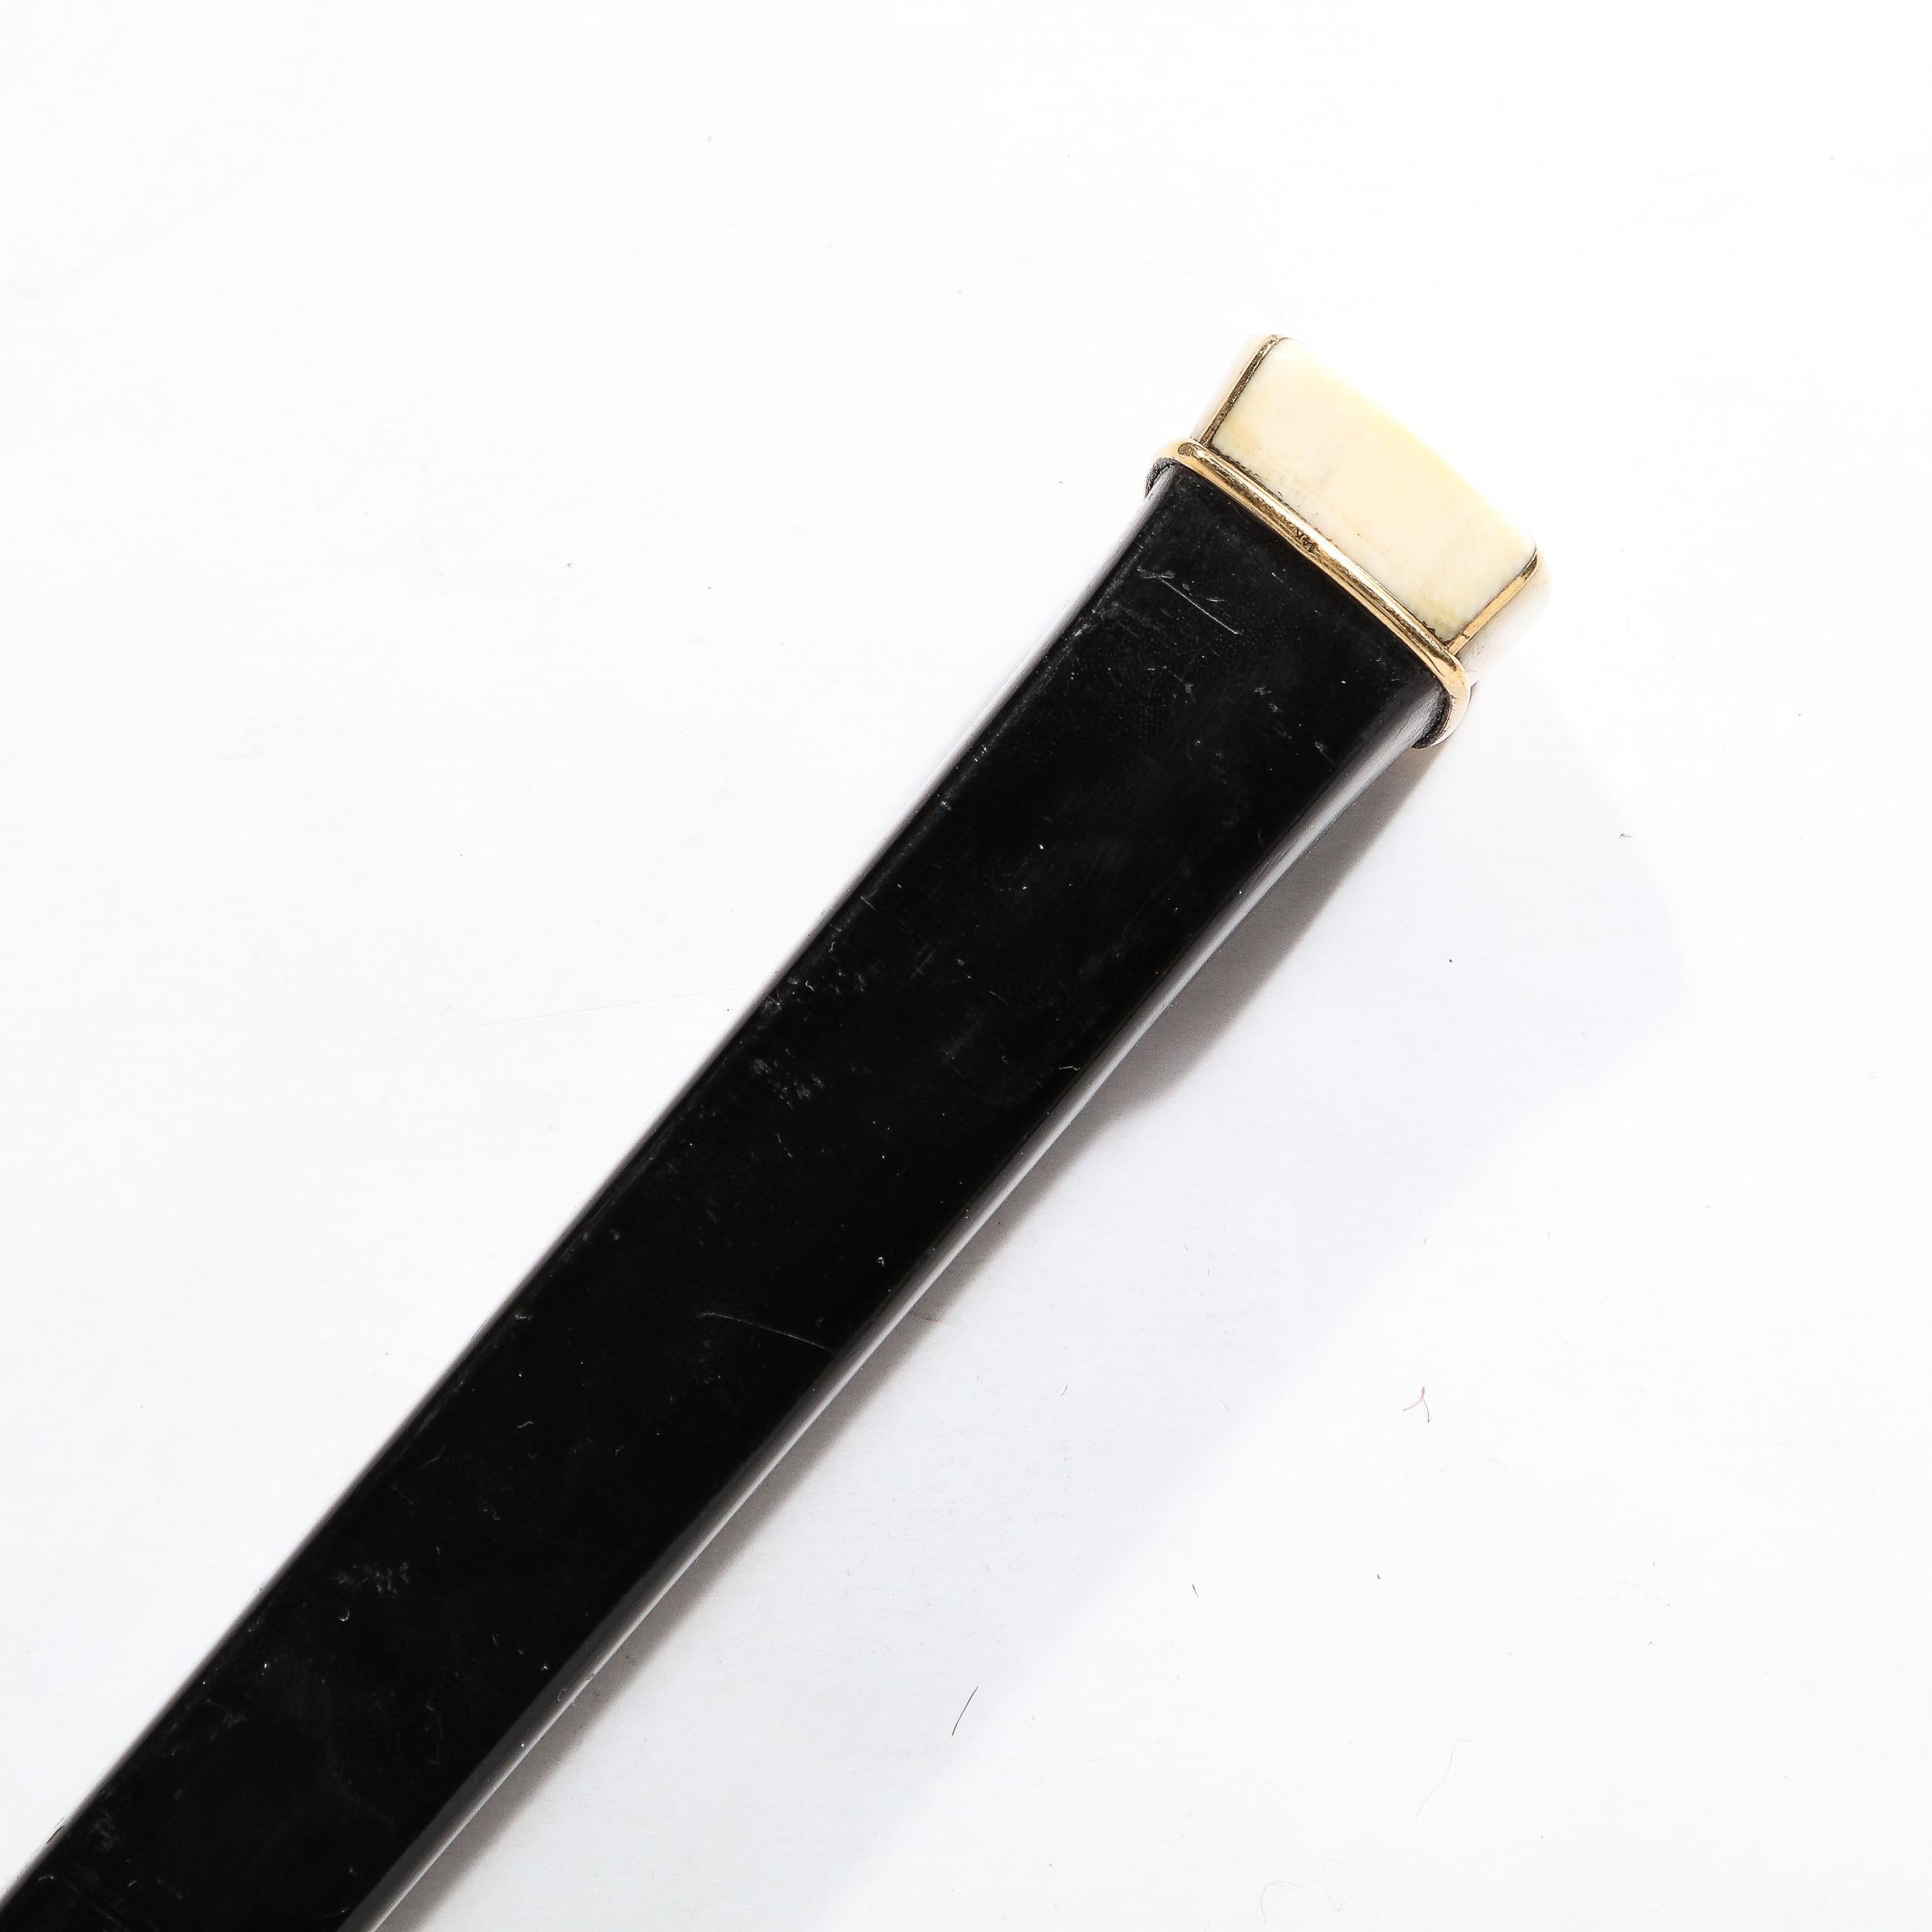 This highly sophisticated Mid-Century Modernist Walking Stick in Ebonized Walnut w/ Genuine Bone and 14K Gold Inlay Pommel Originates from Italy, Circa 1950. Features inlayed detailing in 14Karat Gold affixing the sleek bone pommel to the body of